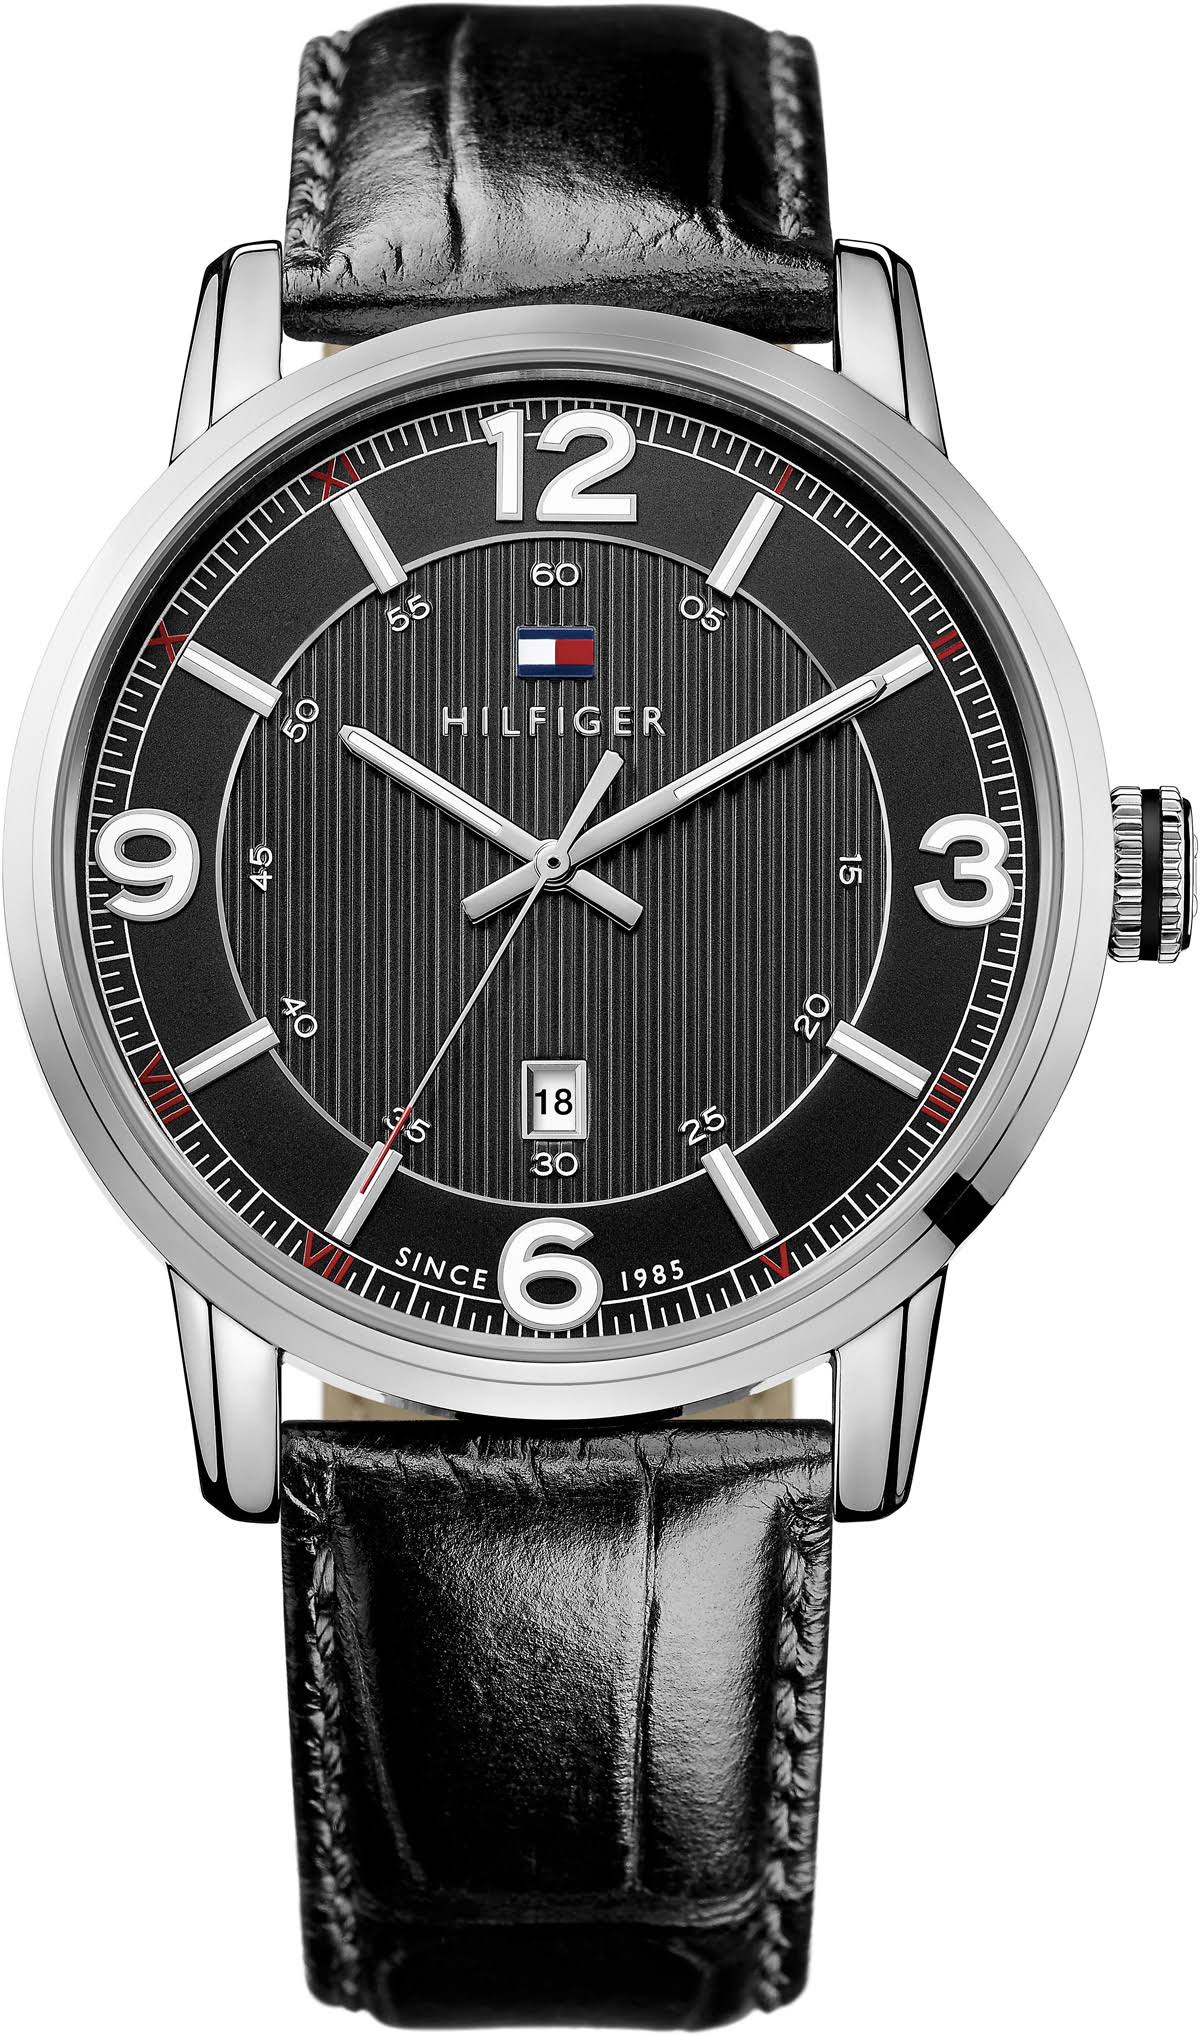 Are Tommy Hilfiger Watches Good Quality